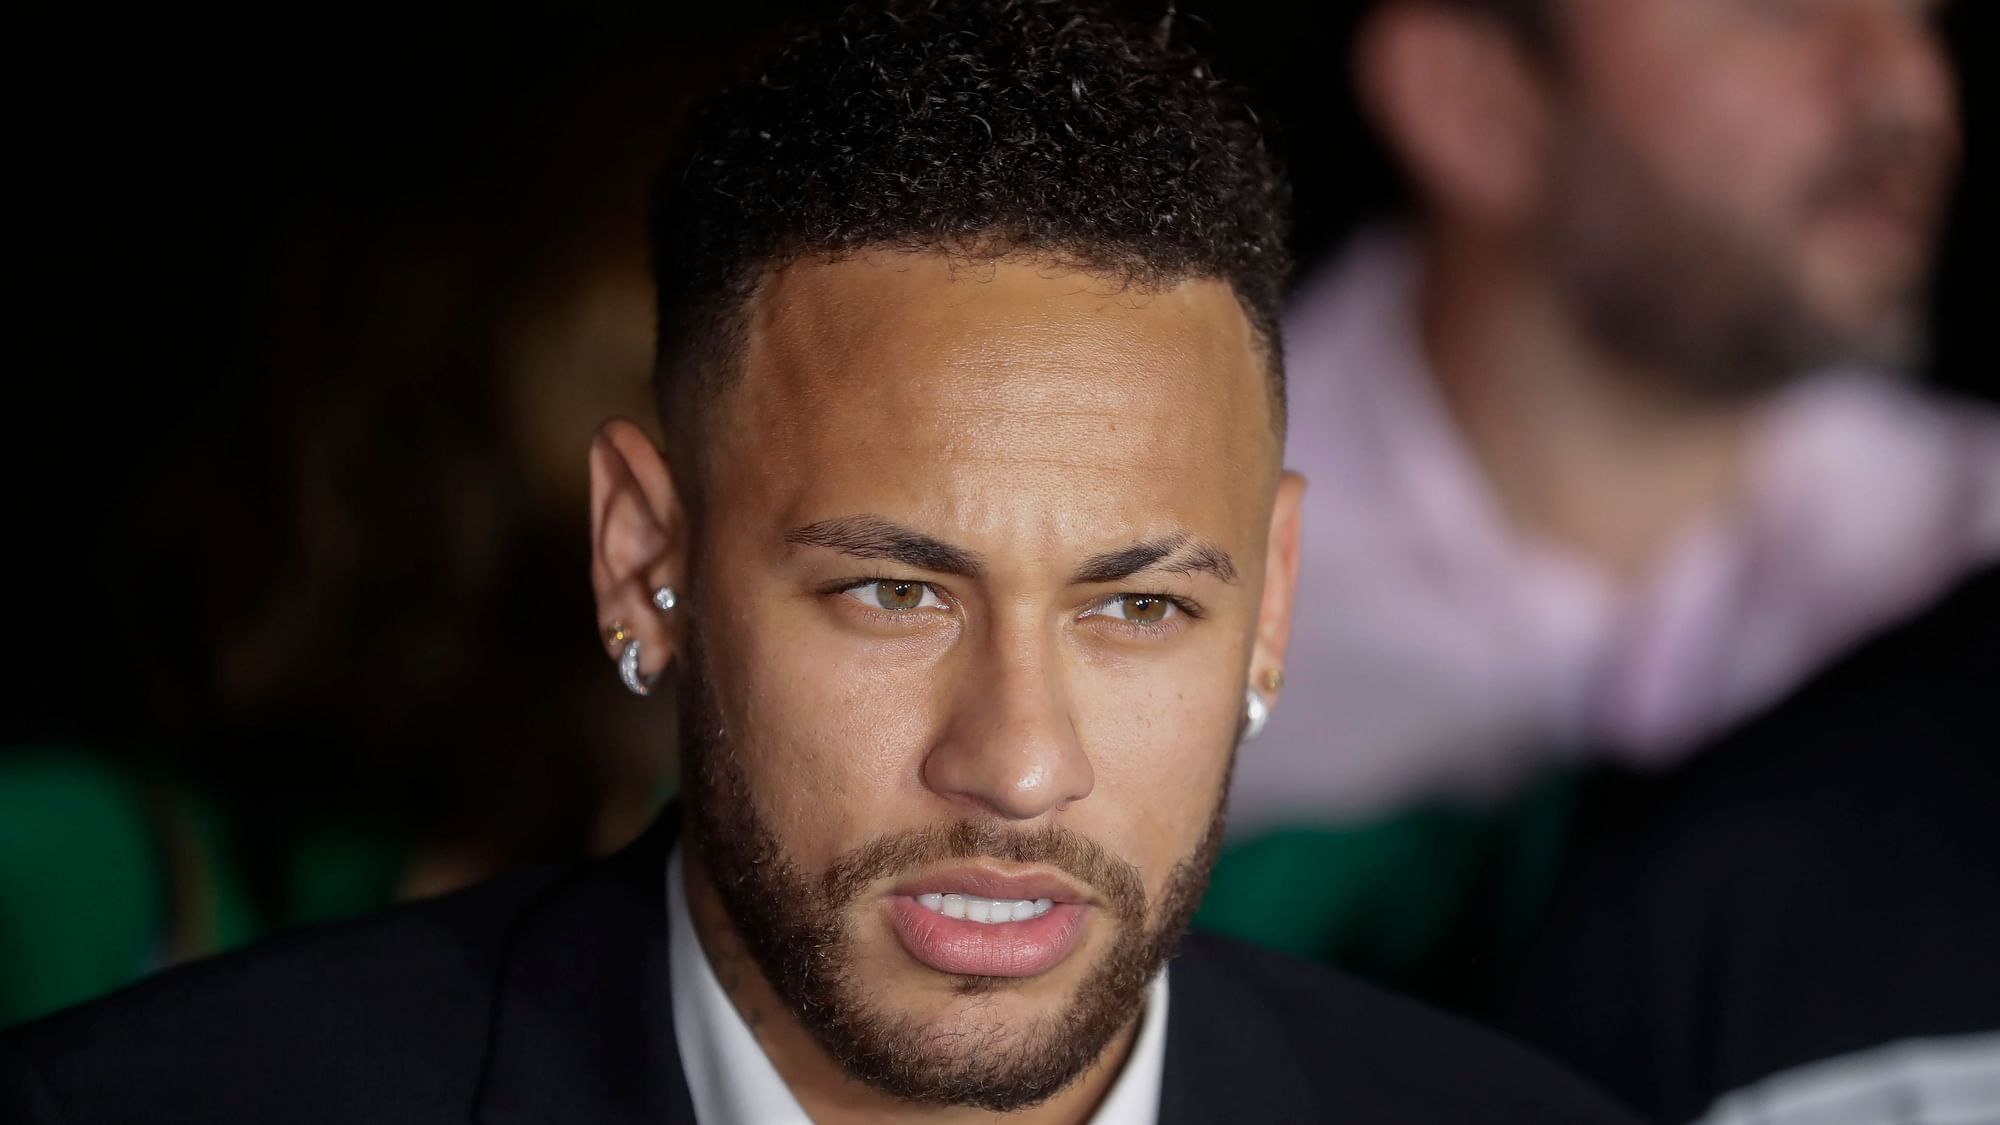 Neymar denied the accusation and said their relations were consensual.